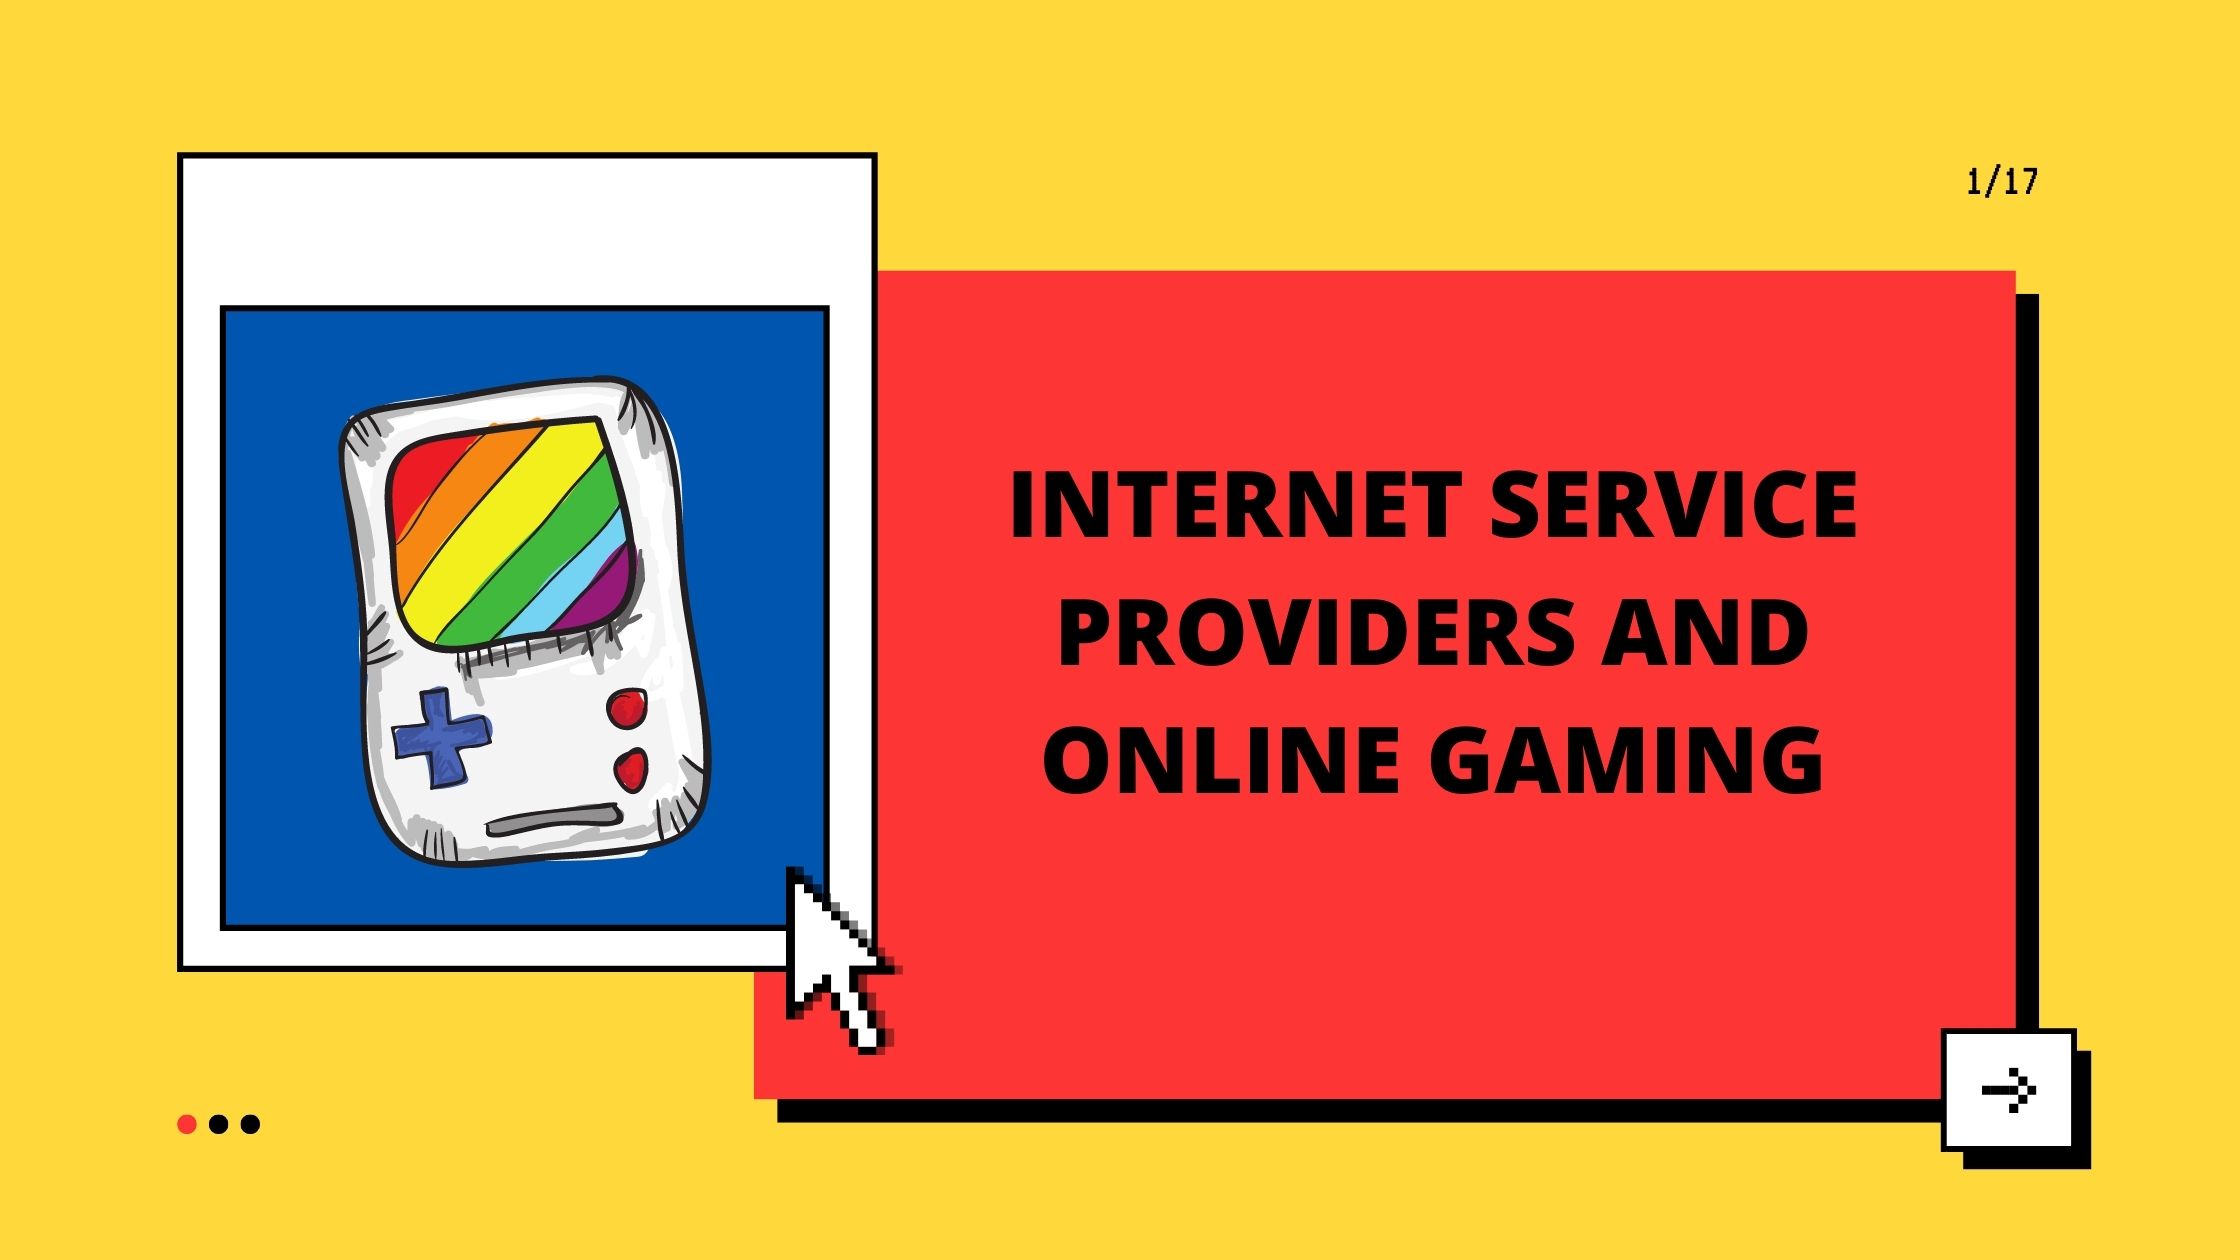 Internet Service Providers and Online Gaming: Important Factors to Know